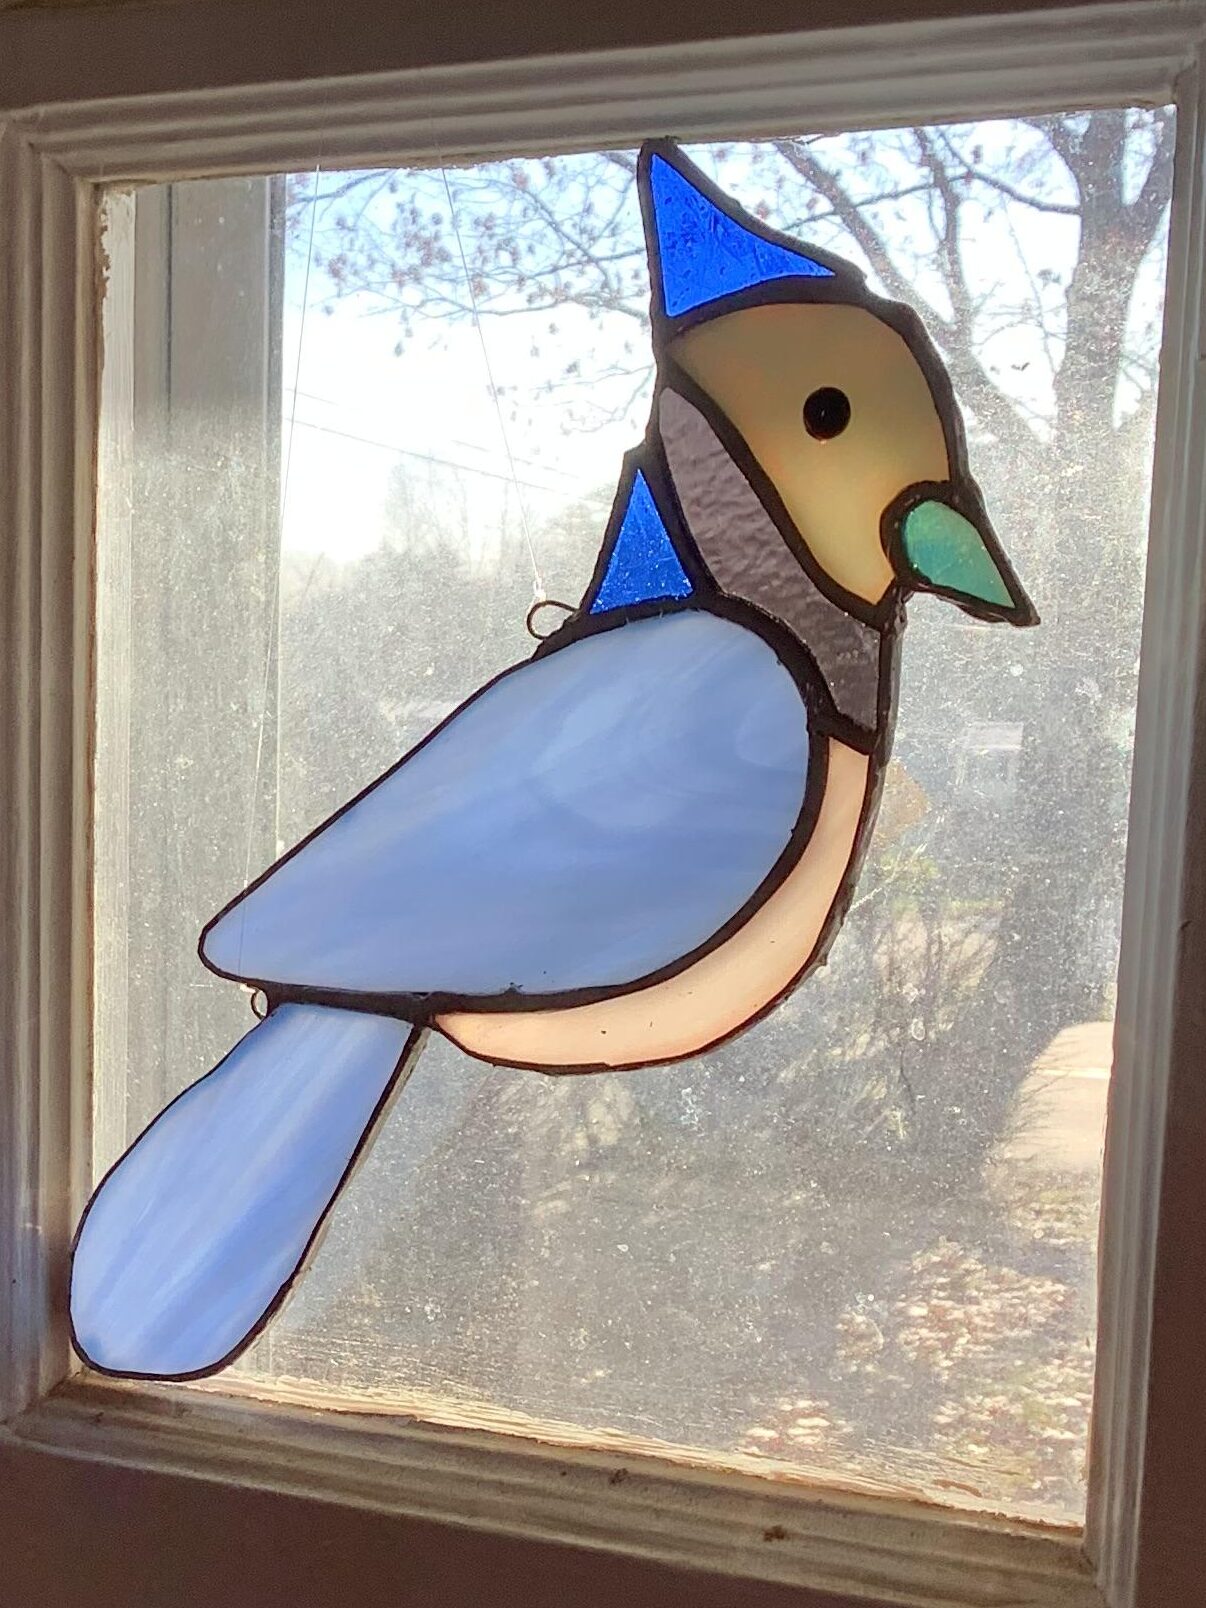 "Original Stained Glass Blue Jay" by Marie Olsen